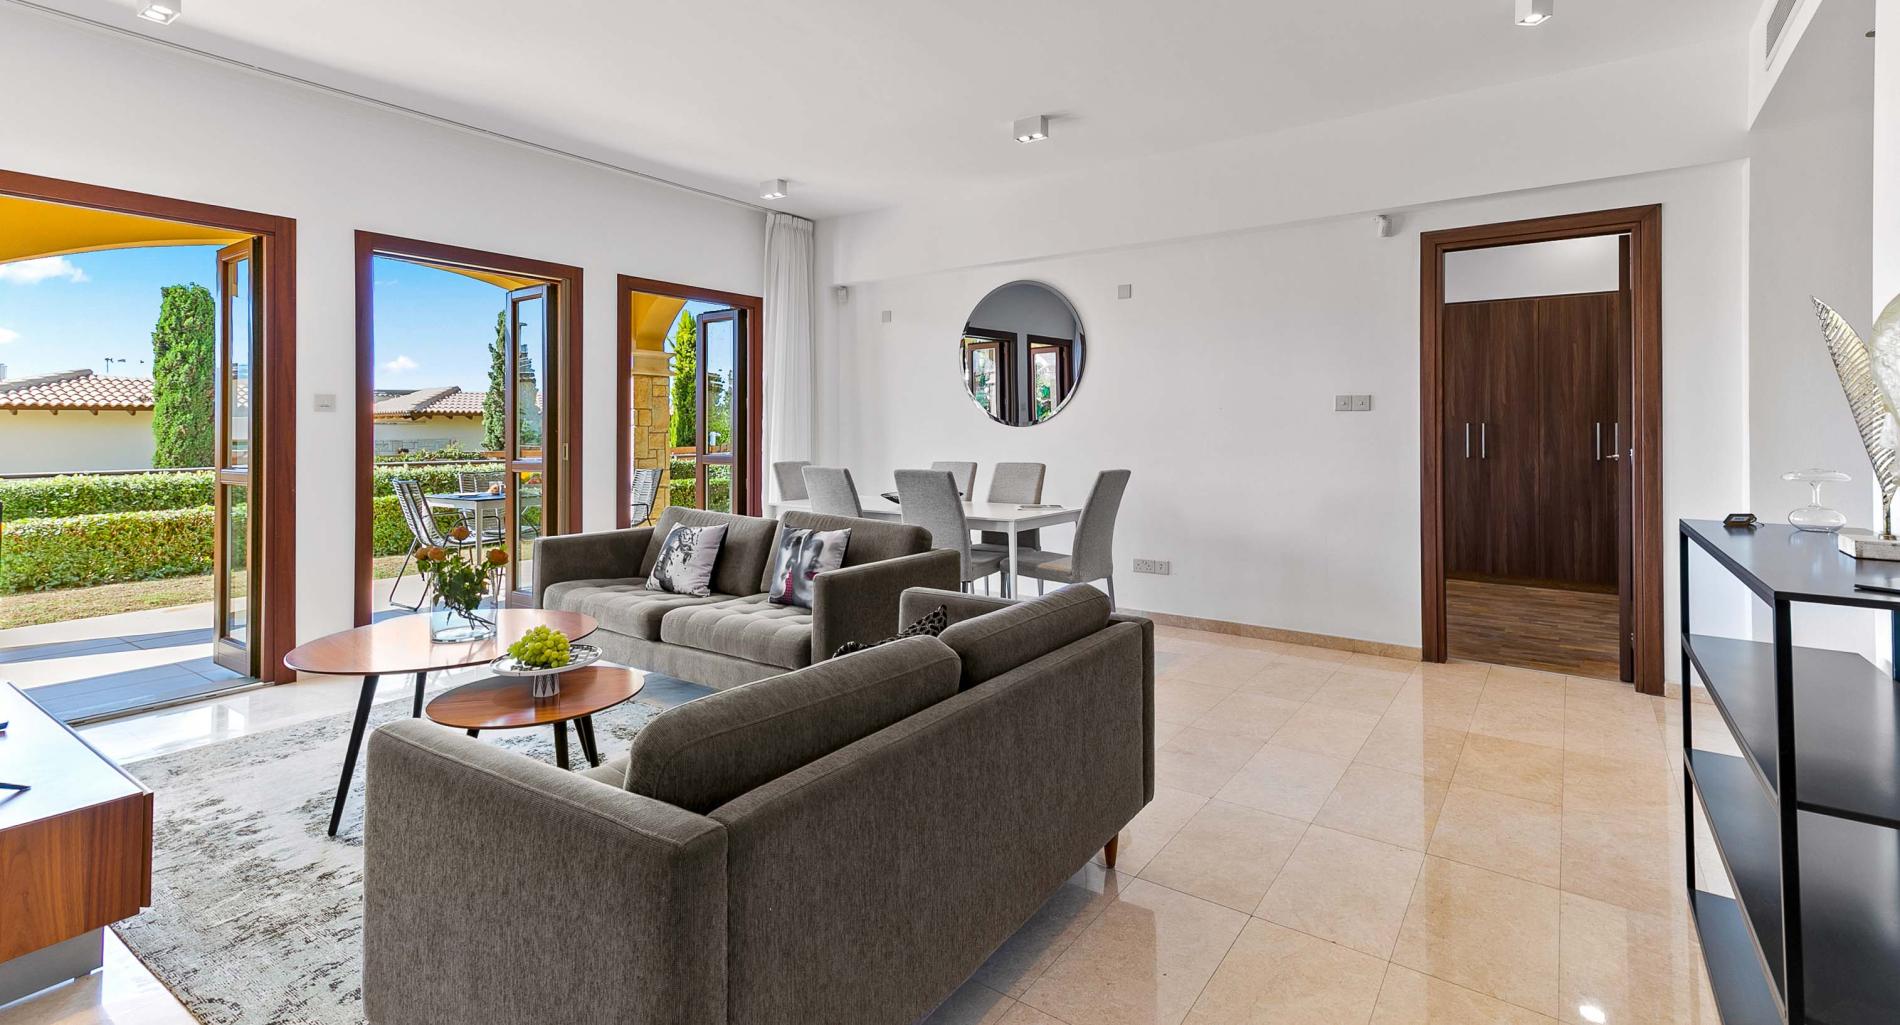 Bright living and dining room, white walls, comfortable brown sofas and grey carpet, with marble floors. Doors opening to private garden and outside dining furniture. Apartment AP02 on Aphrodite Hills Resort.